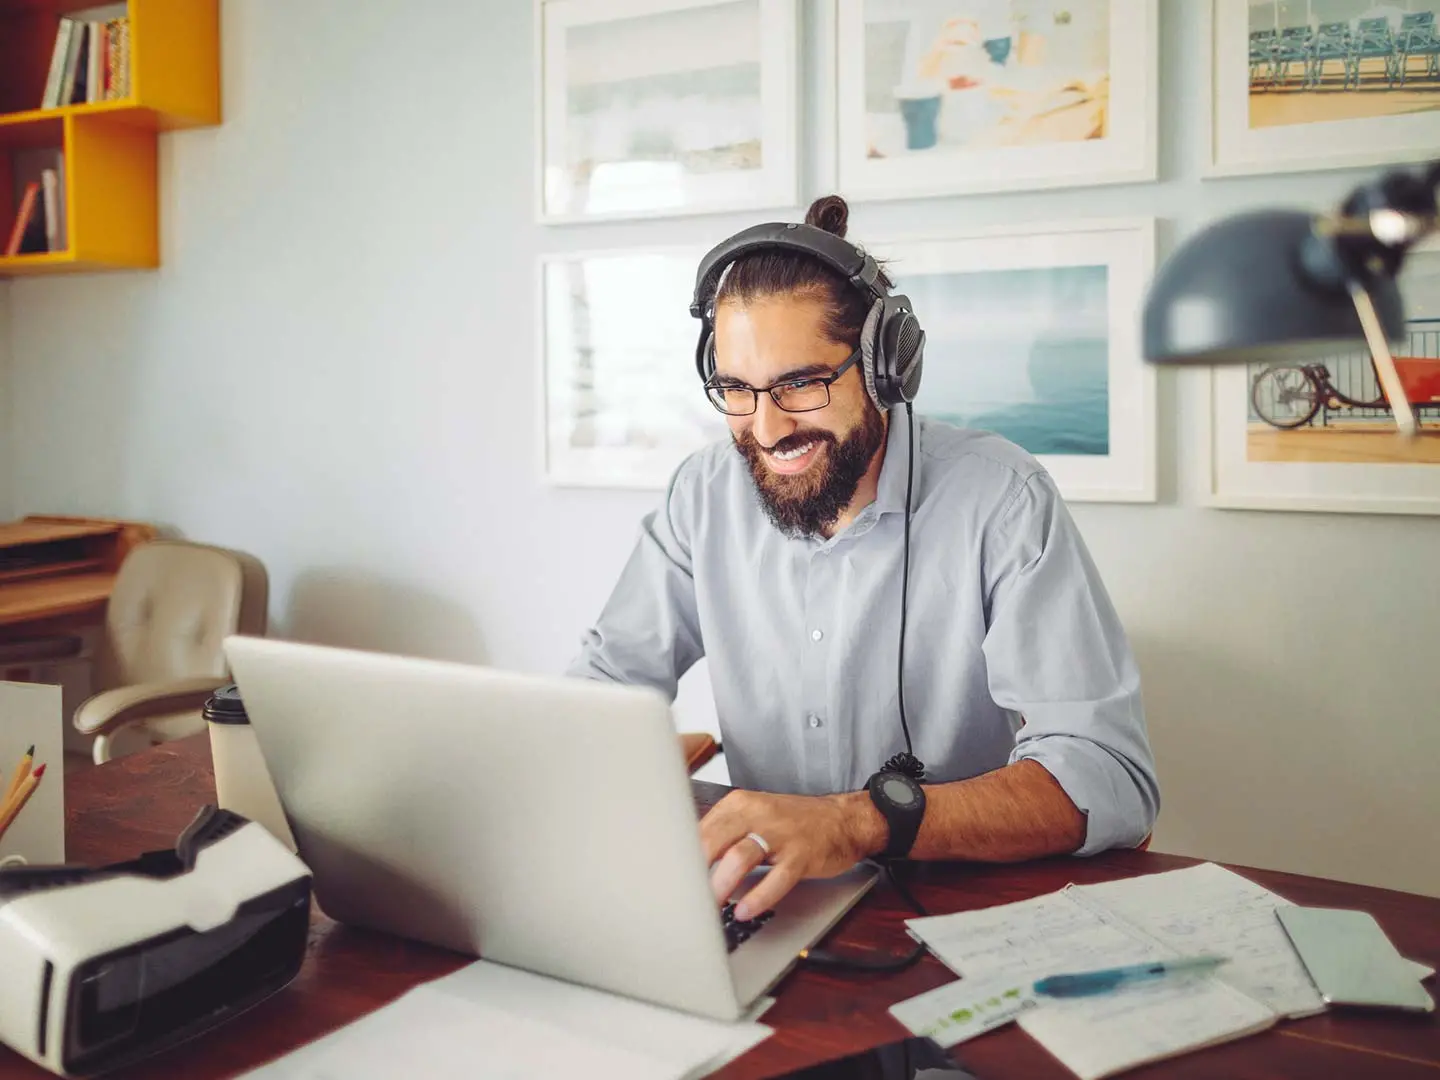 Man working from home in office with computer and headphones